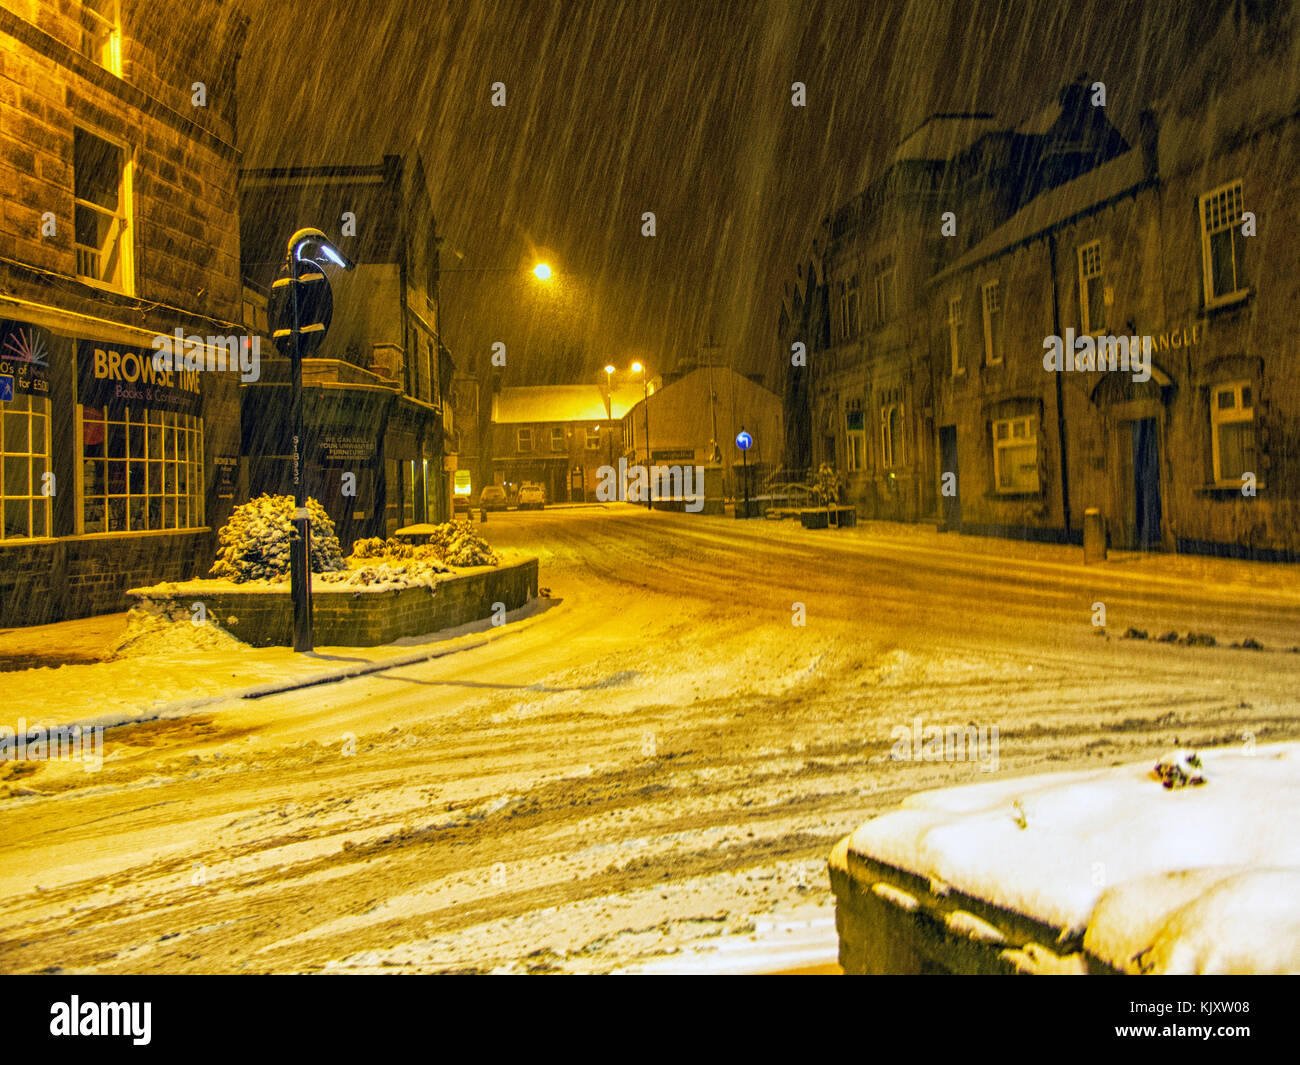 Otley in West Yorkshire showing the road junction of Bridge street, Clapgate and Courthouse street with snow falling on a cold February night. Stock Photo